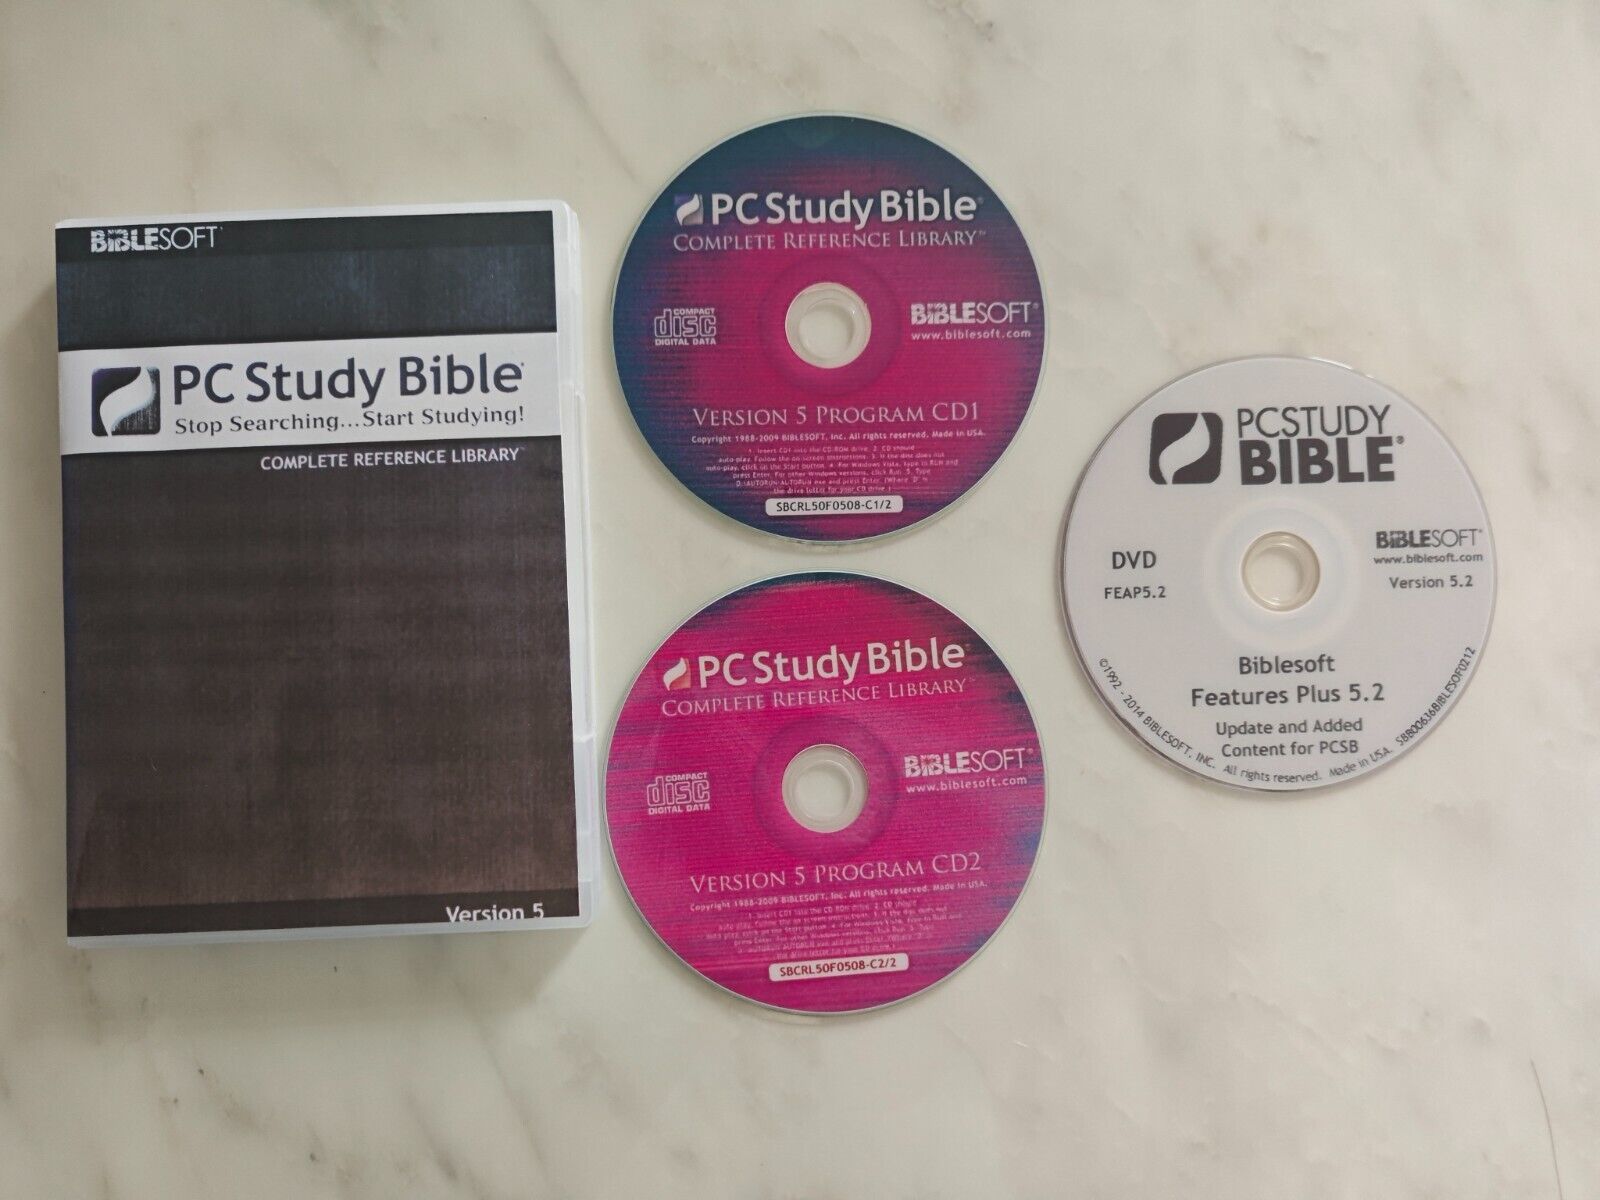 Biblesoft 2014 - PC Study Bible COMPLETE REFERENCE LIBRARY DVD ROM Version 5.2